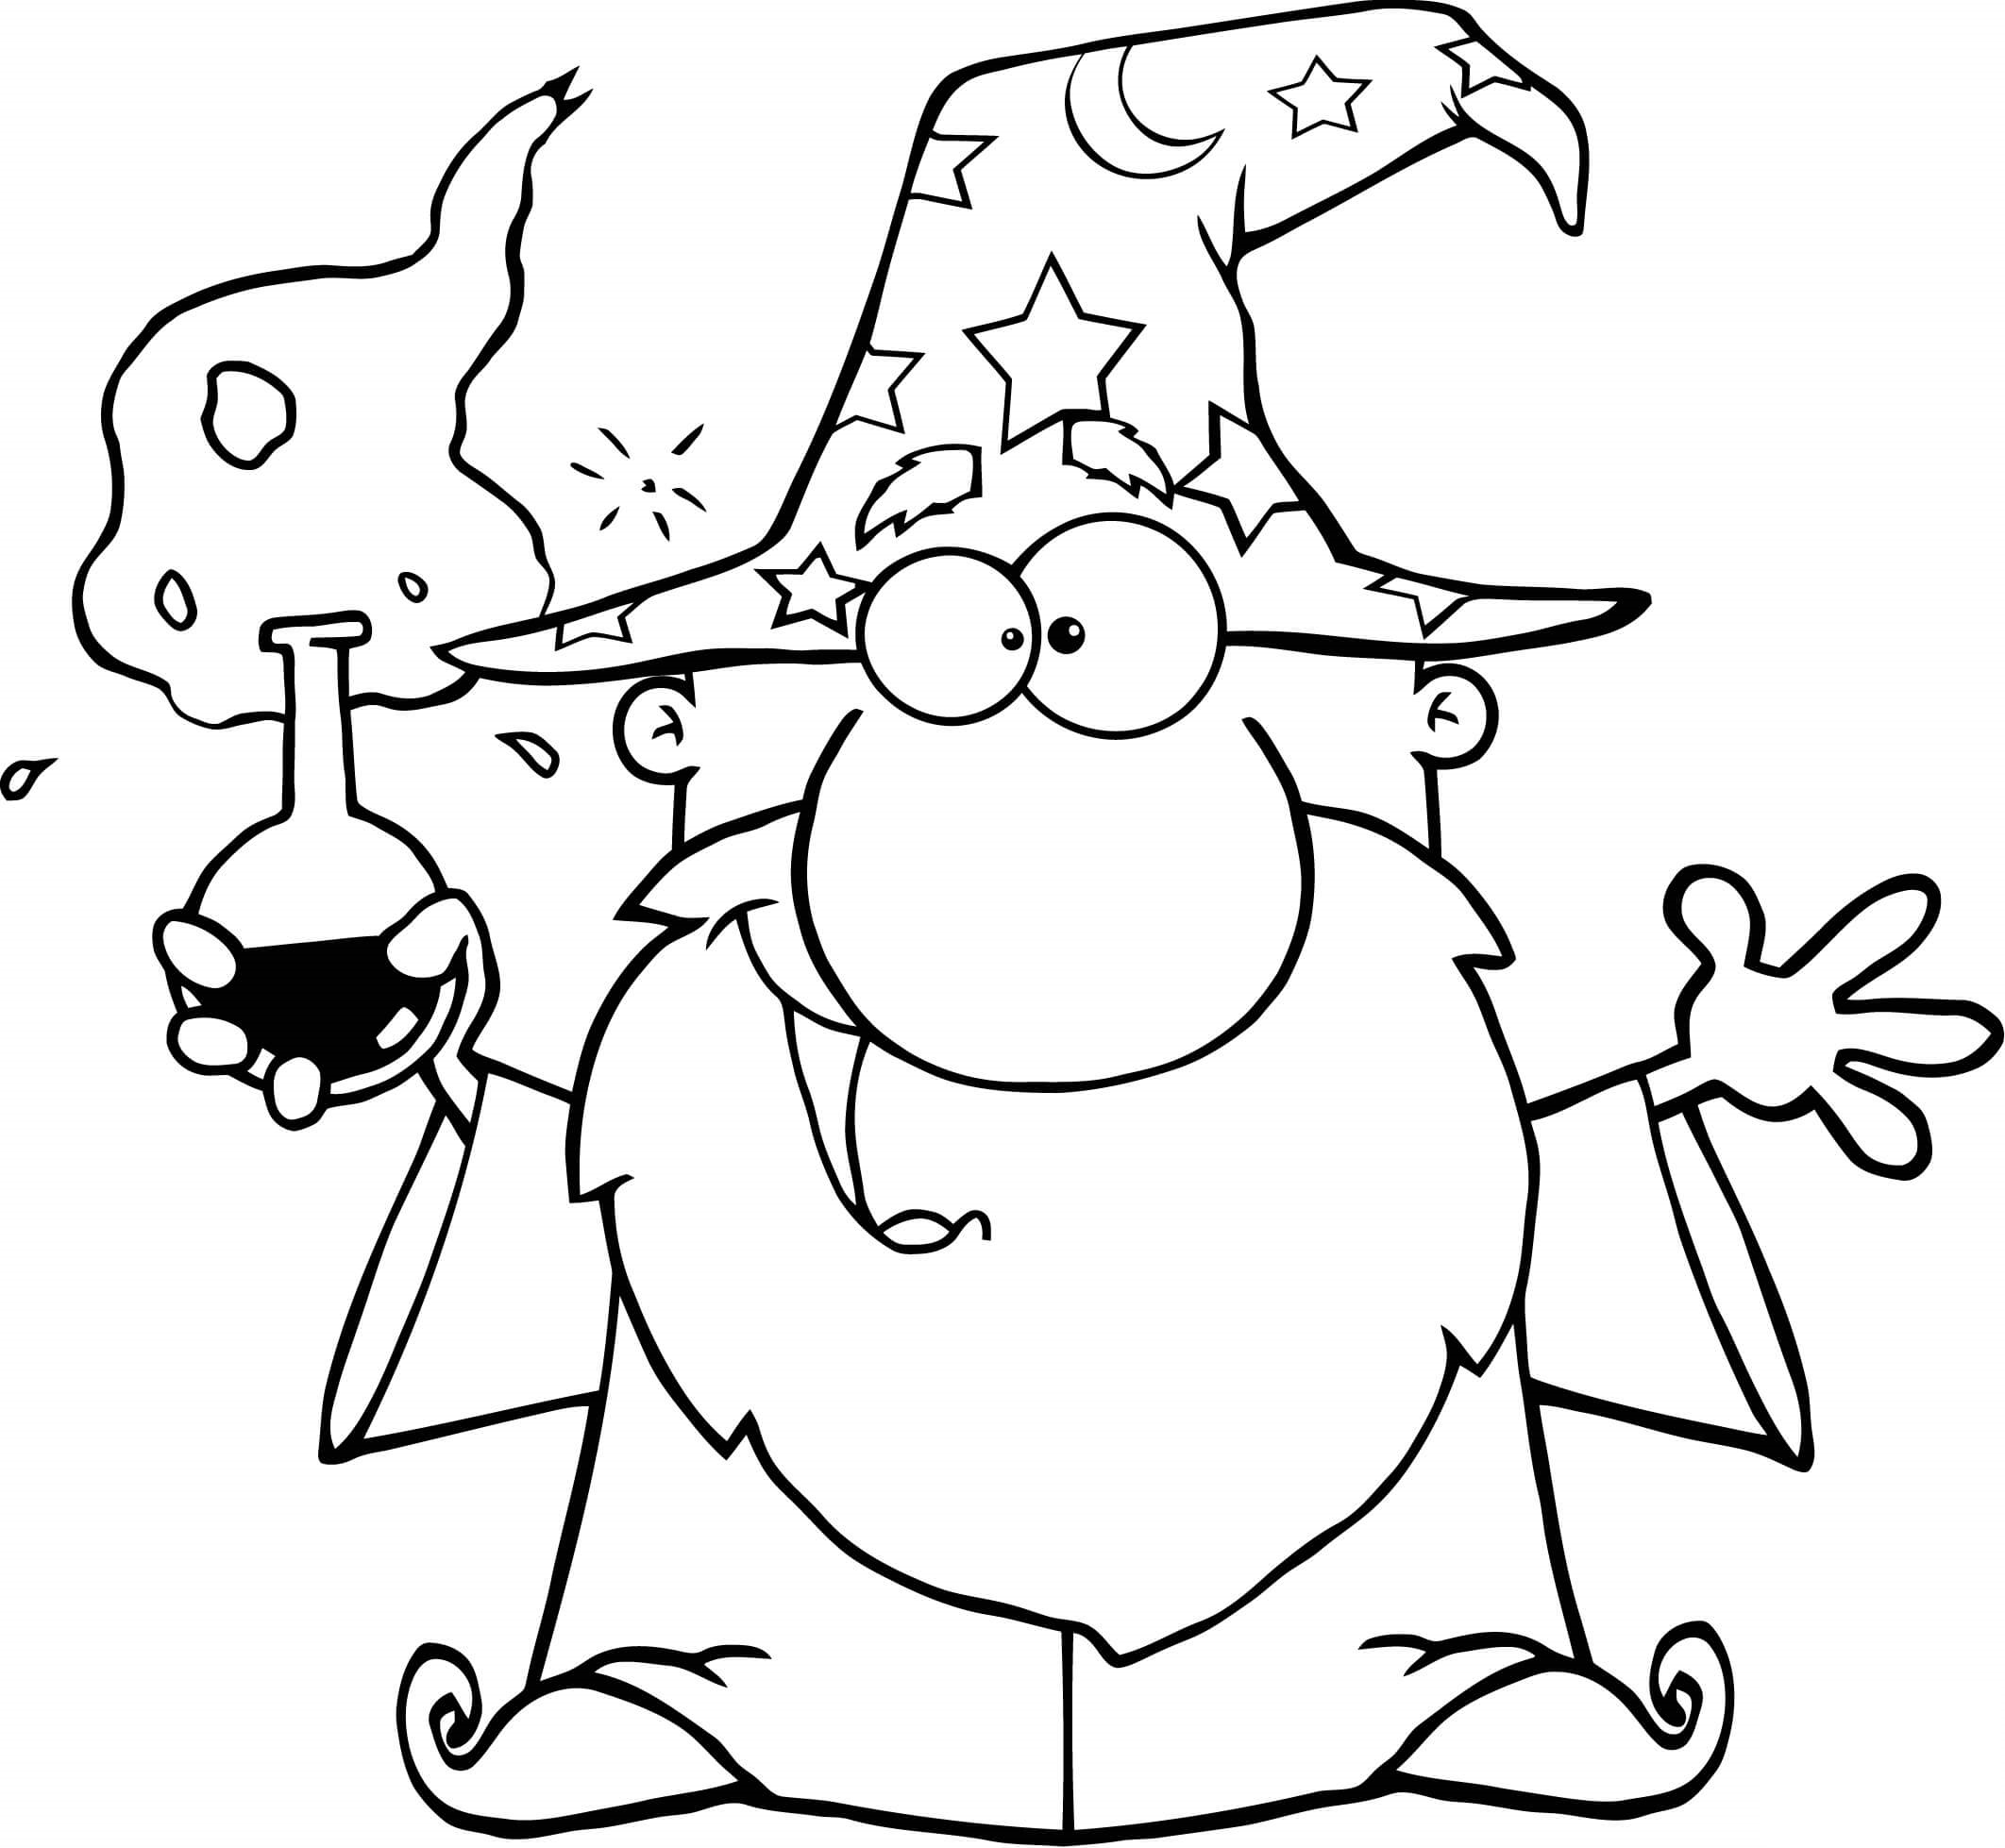 Crazy Wizard Holding A Green Magic Potion Coloring Page